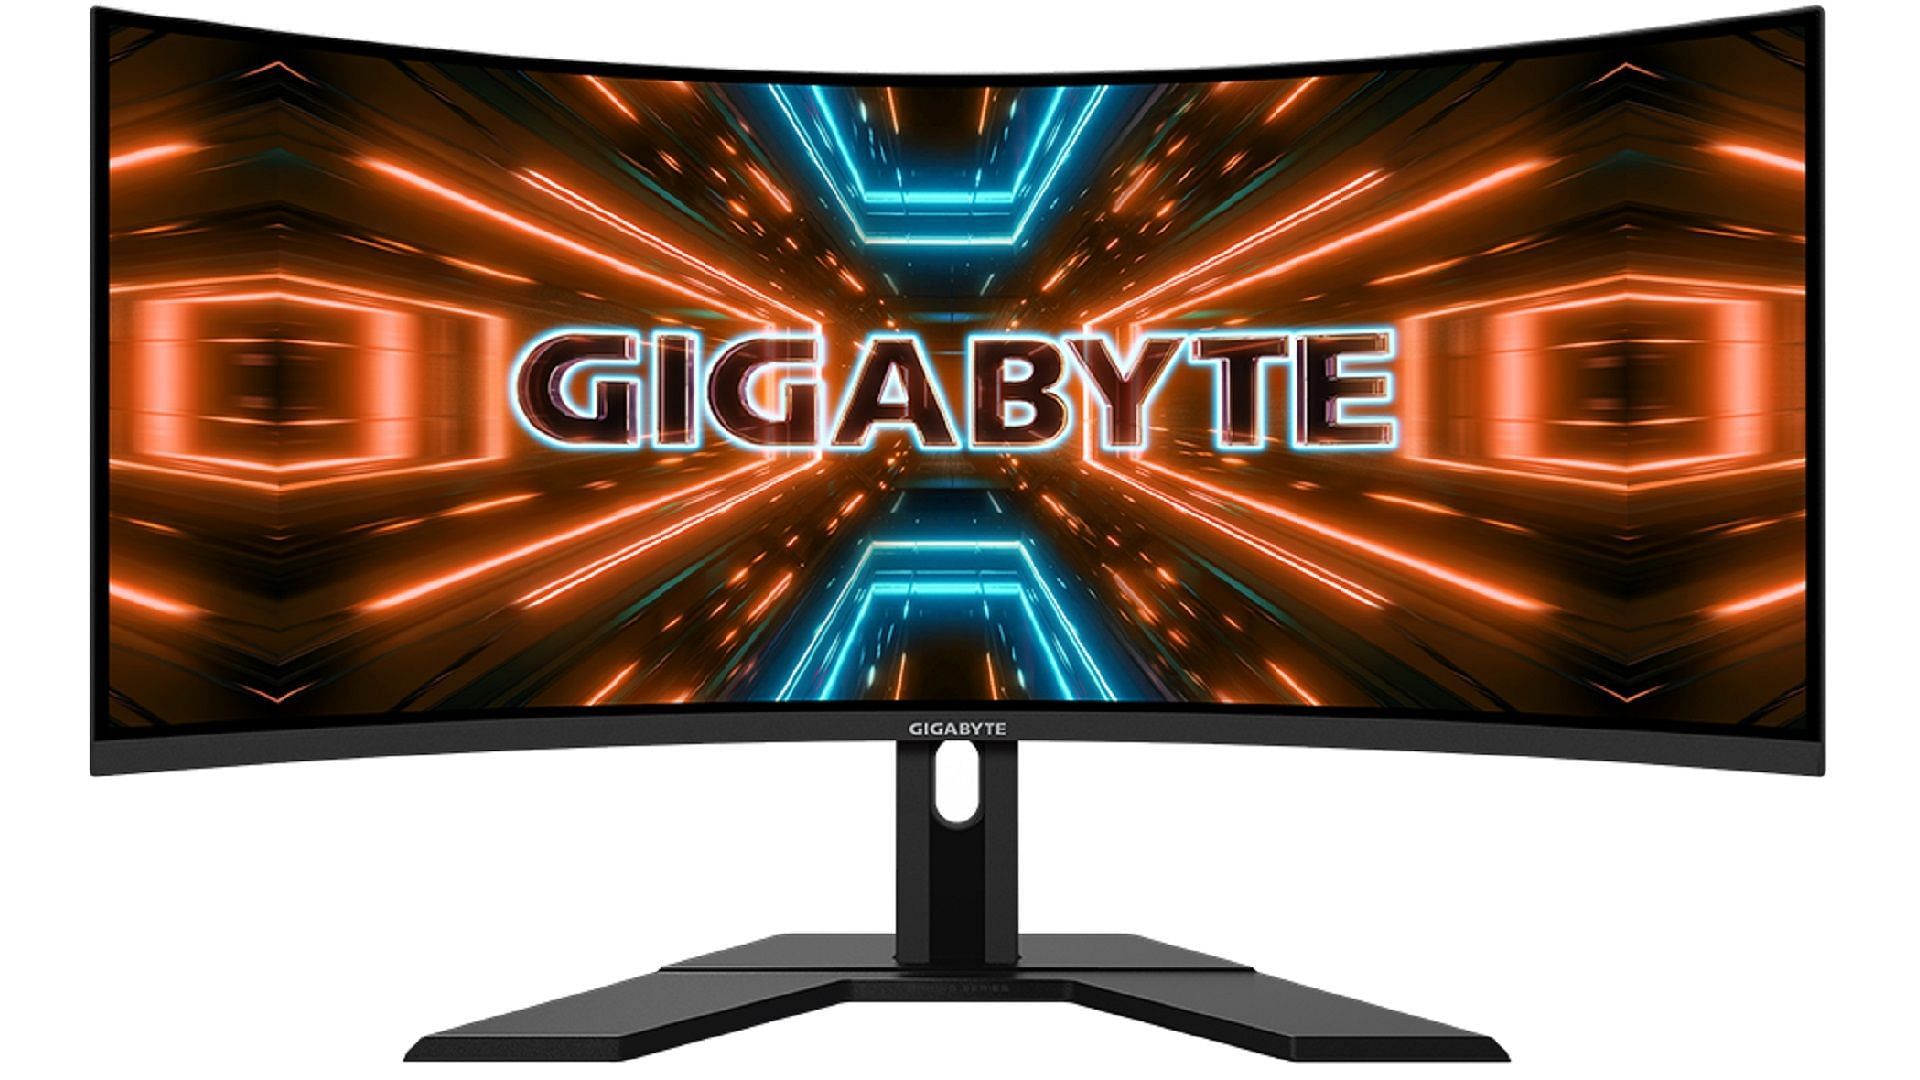 Gigabyte G34WQC A ultrawide gaming monitor with height adjustable stand (Image via Gigabyte)